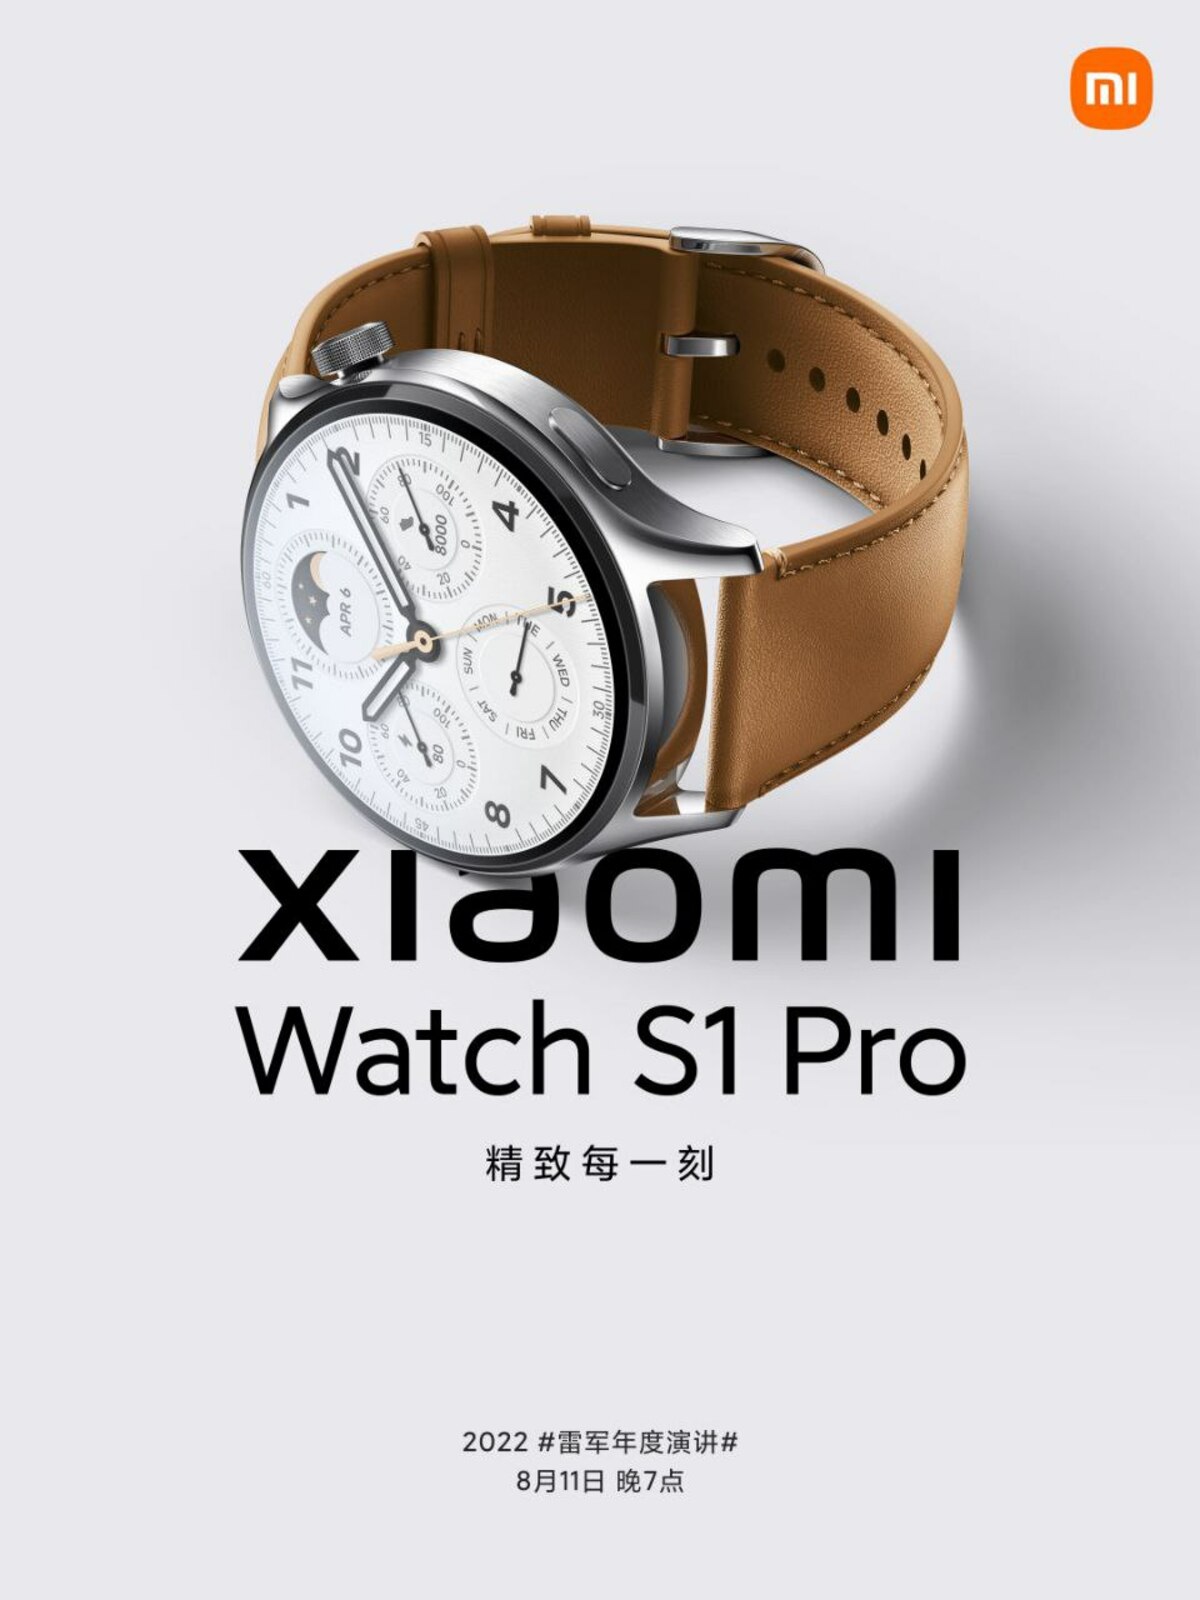 Xiaomi Watch S3 limited edition smartwatch launched - Times of India